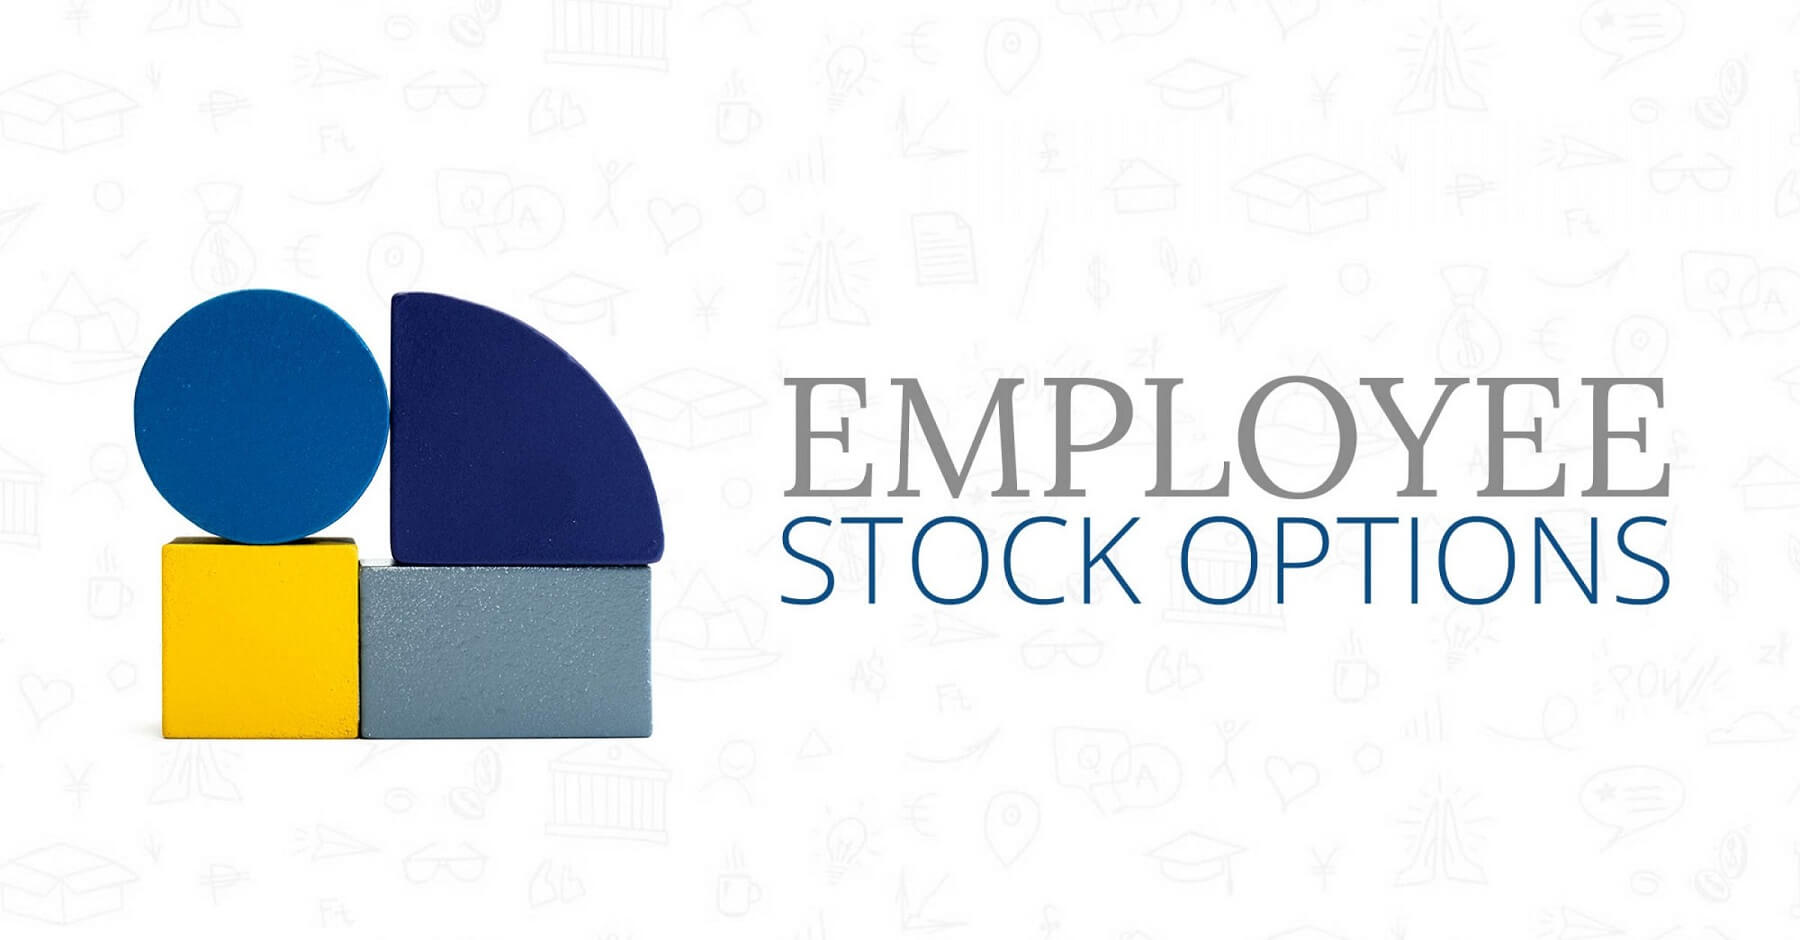 Why giving employees stock options will help your business thrive